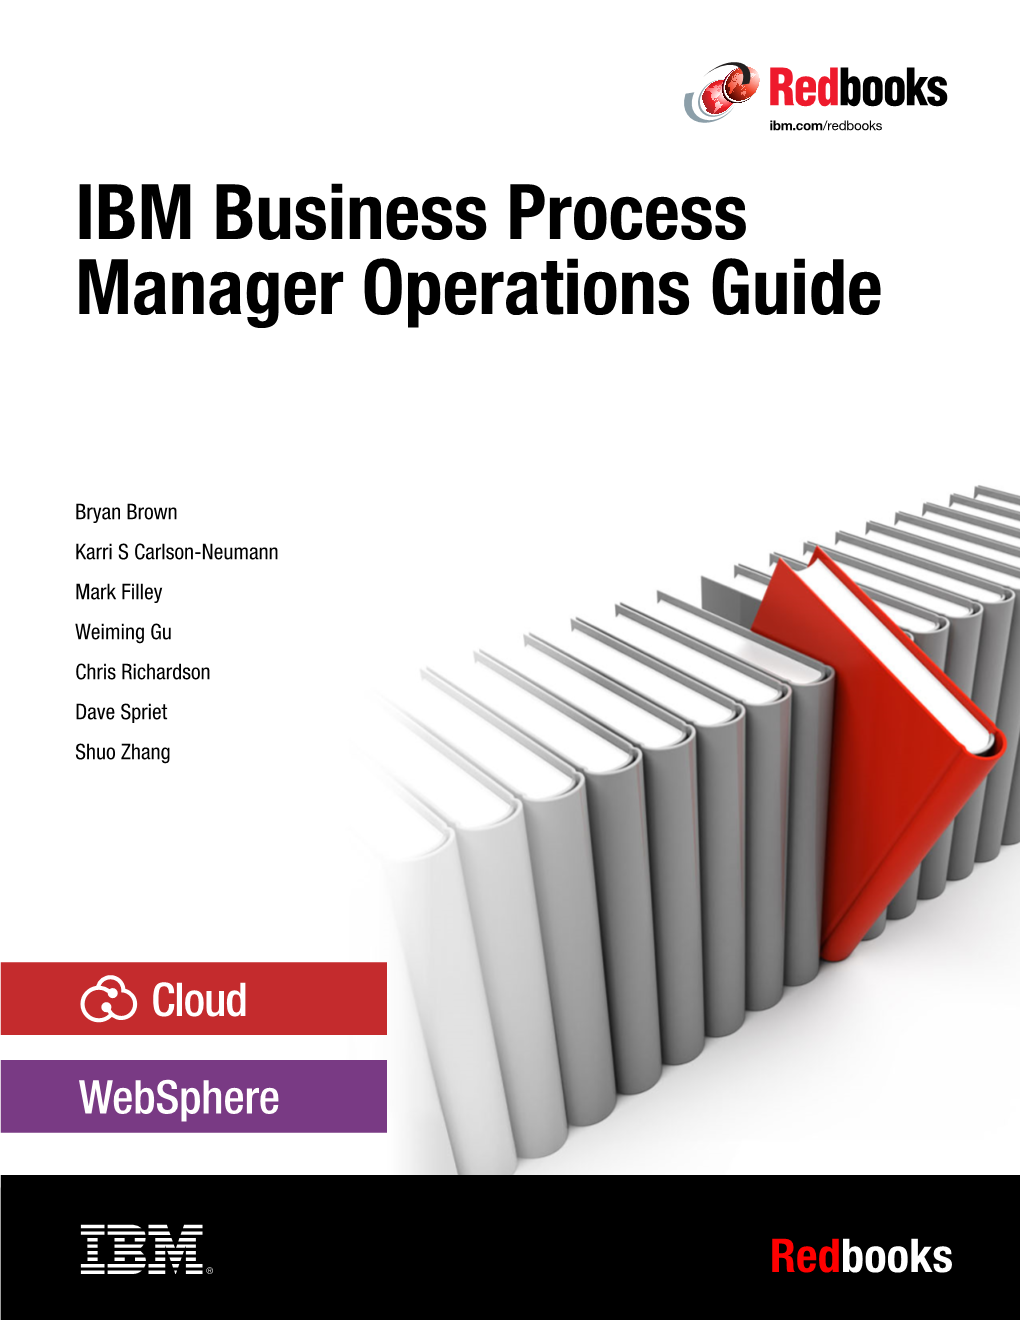 IBM Business Process Manager Operations Guide